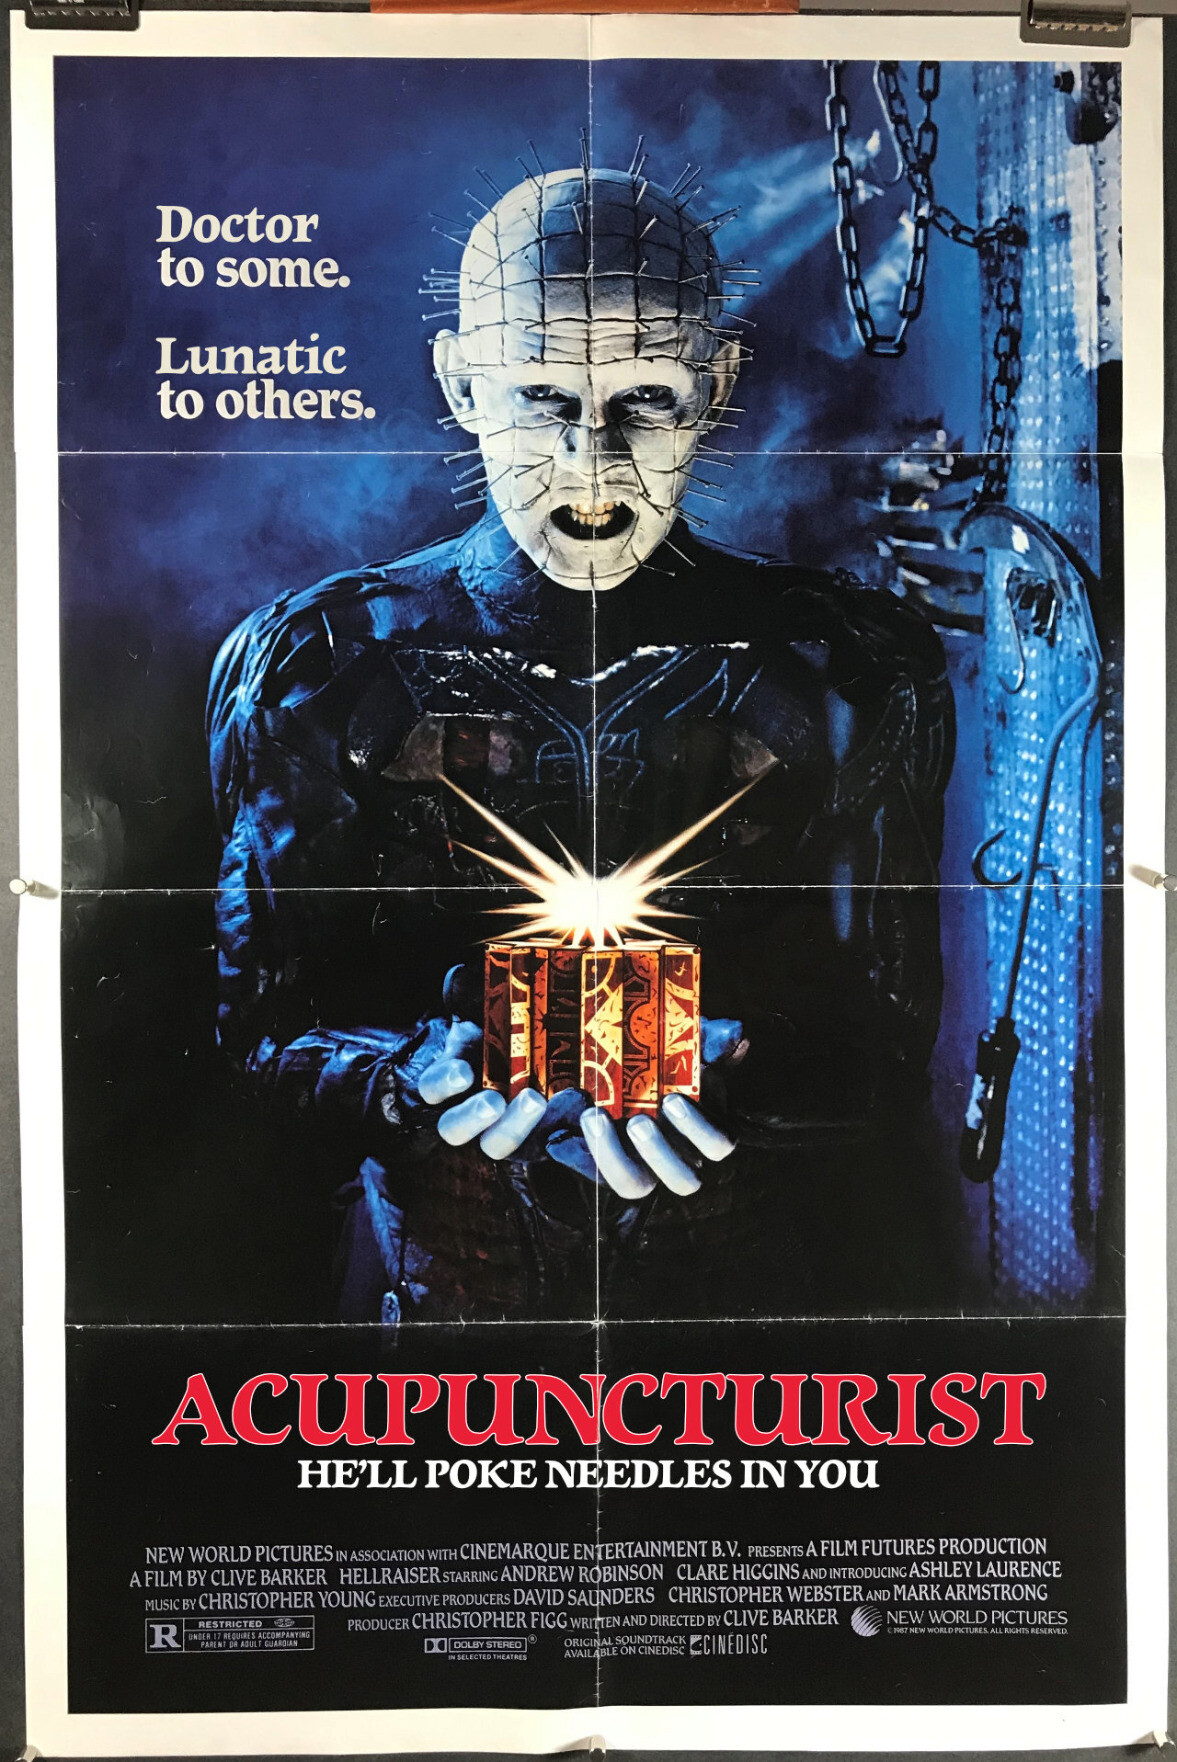 The classic Hellraiser poster, depicting the pin-headed cenobite, but the poster has been altered to be for ACUPUNCTURIST instead. There are two taglines:<br>Doctor to some. Lunatic to Others<br>&<br>He'll poke needles in you